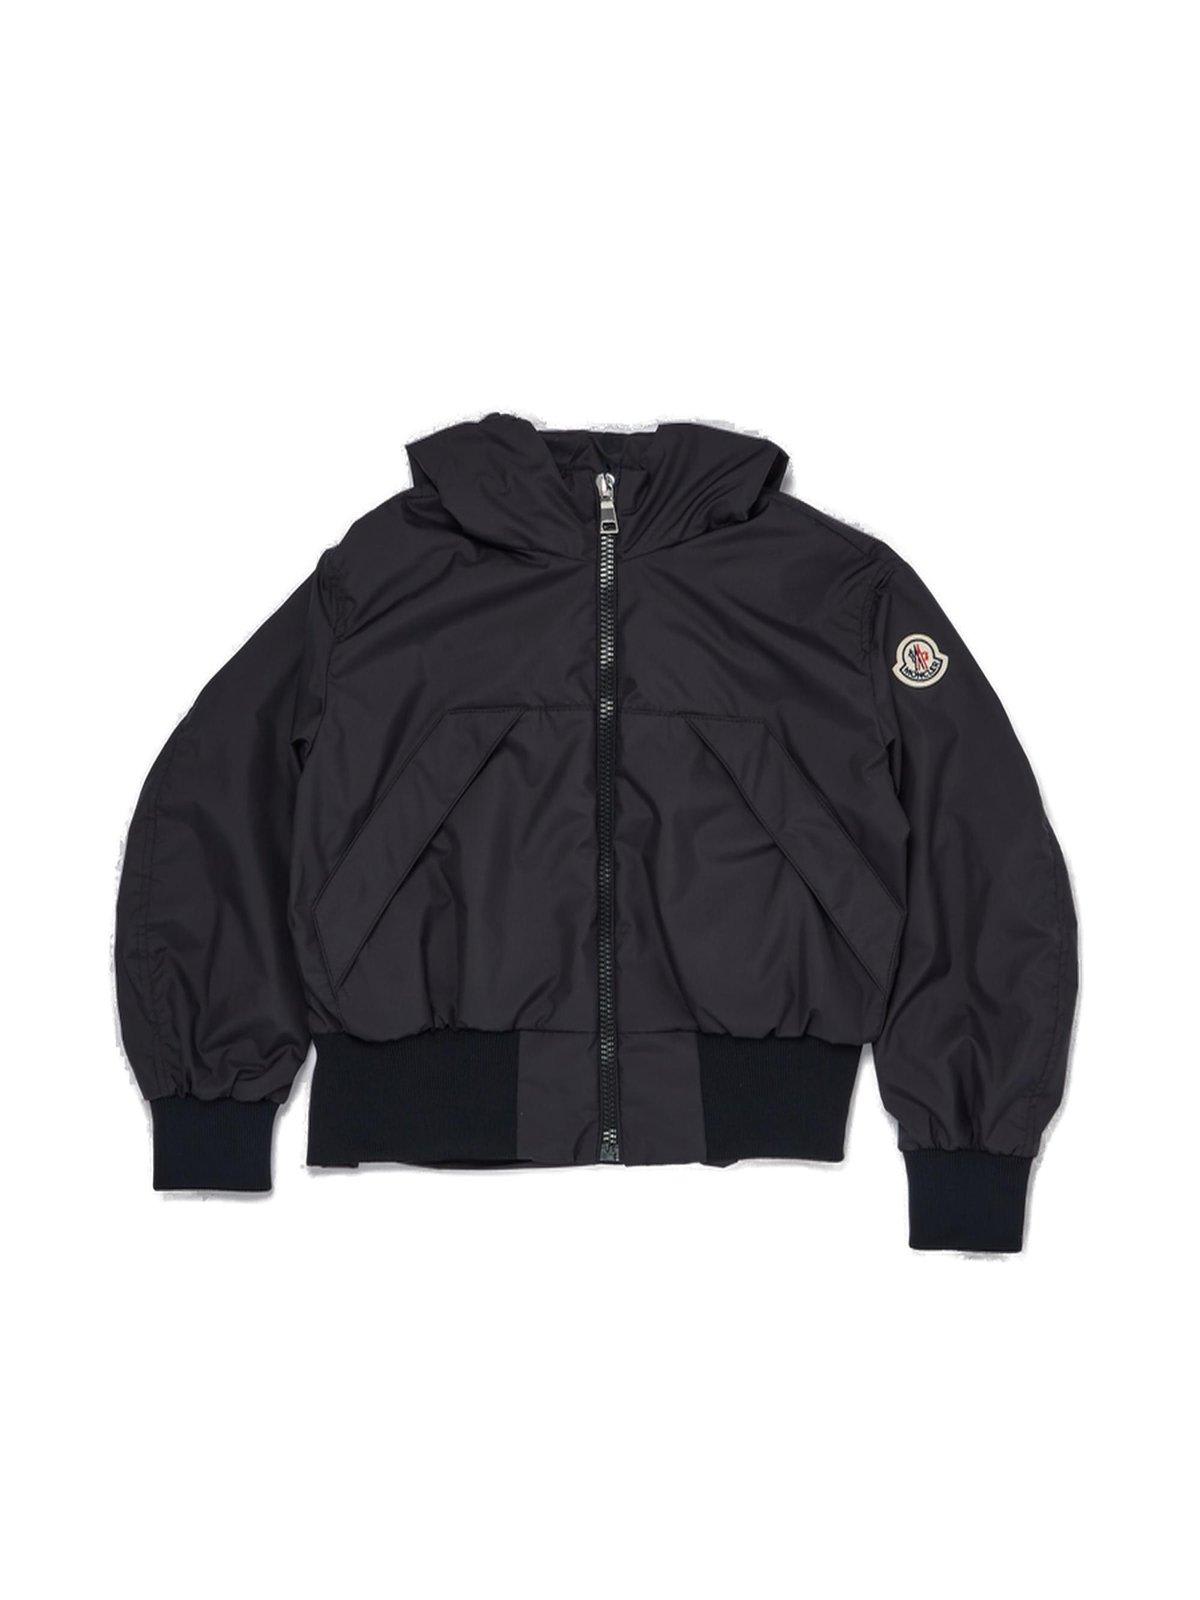 Moncler Assia Hooded Jacket